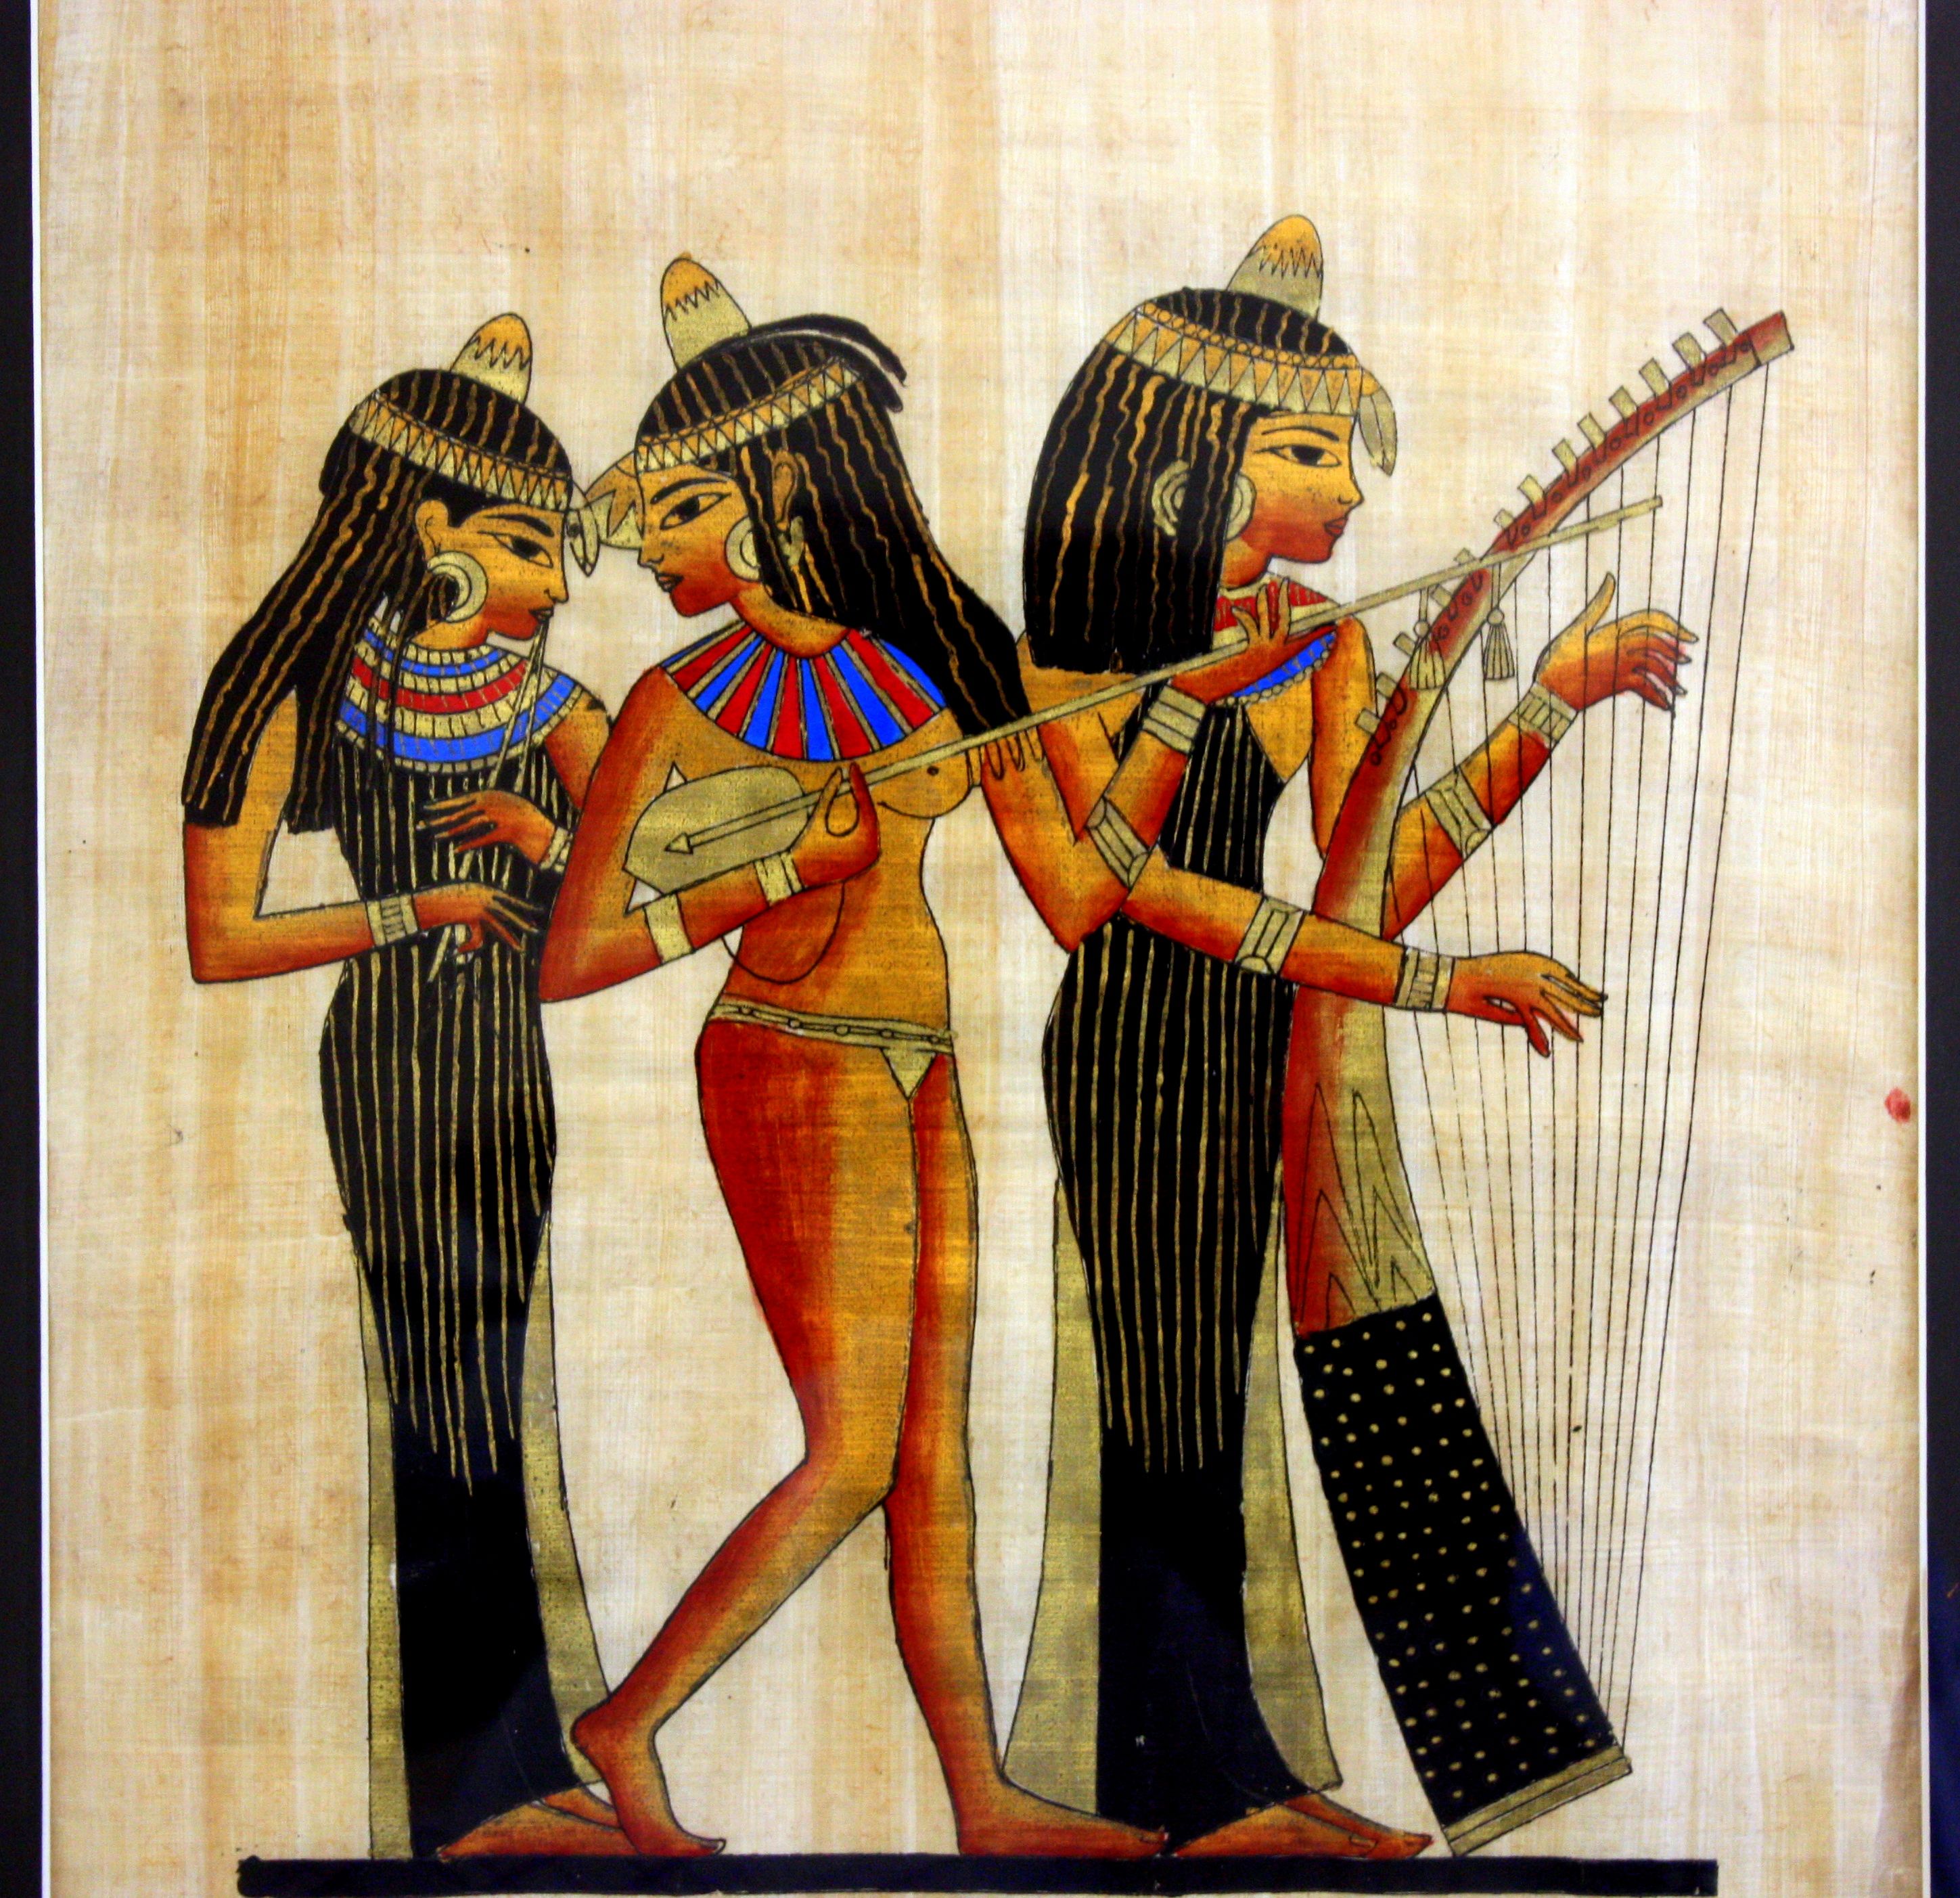 Ancient Egyptian Women Enjoyed A Life Of Equality And Pleasure Rarely Seen In History